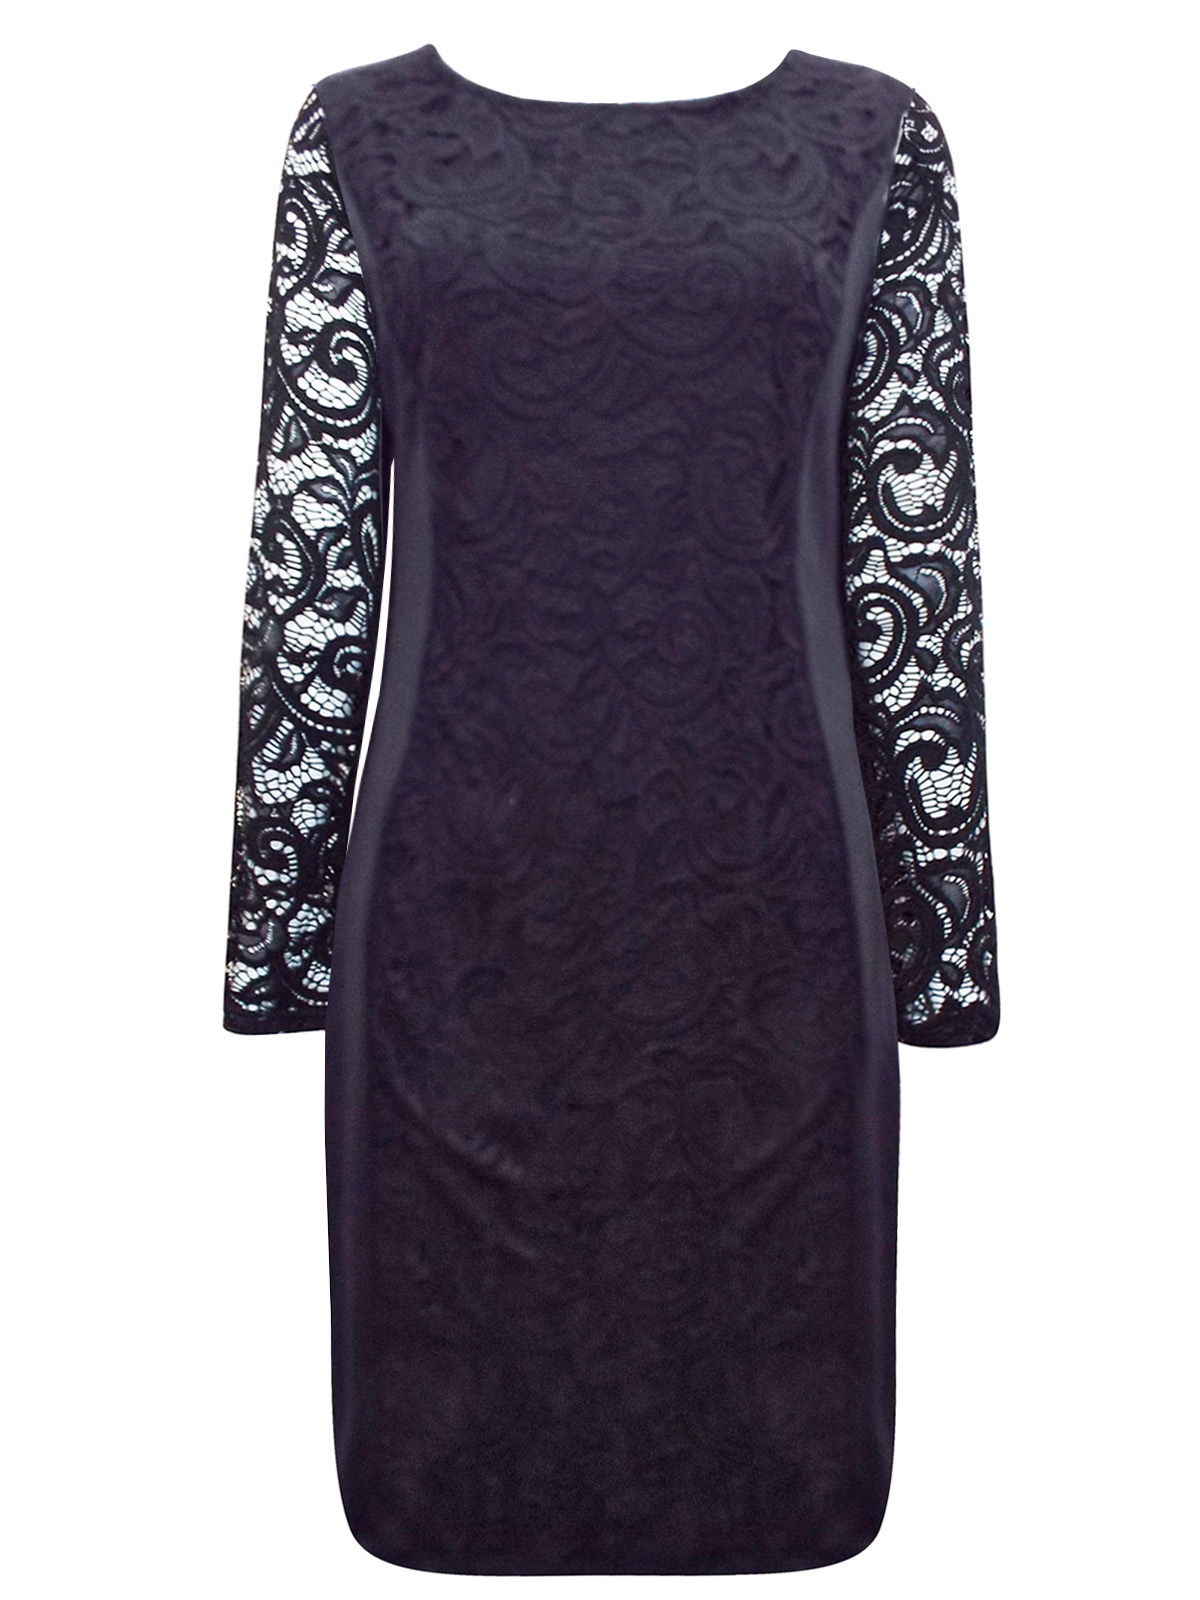 First Avenue BLACK Sheer Sleeve Lace Panelled Dress - Size 10 to 20